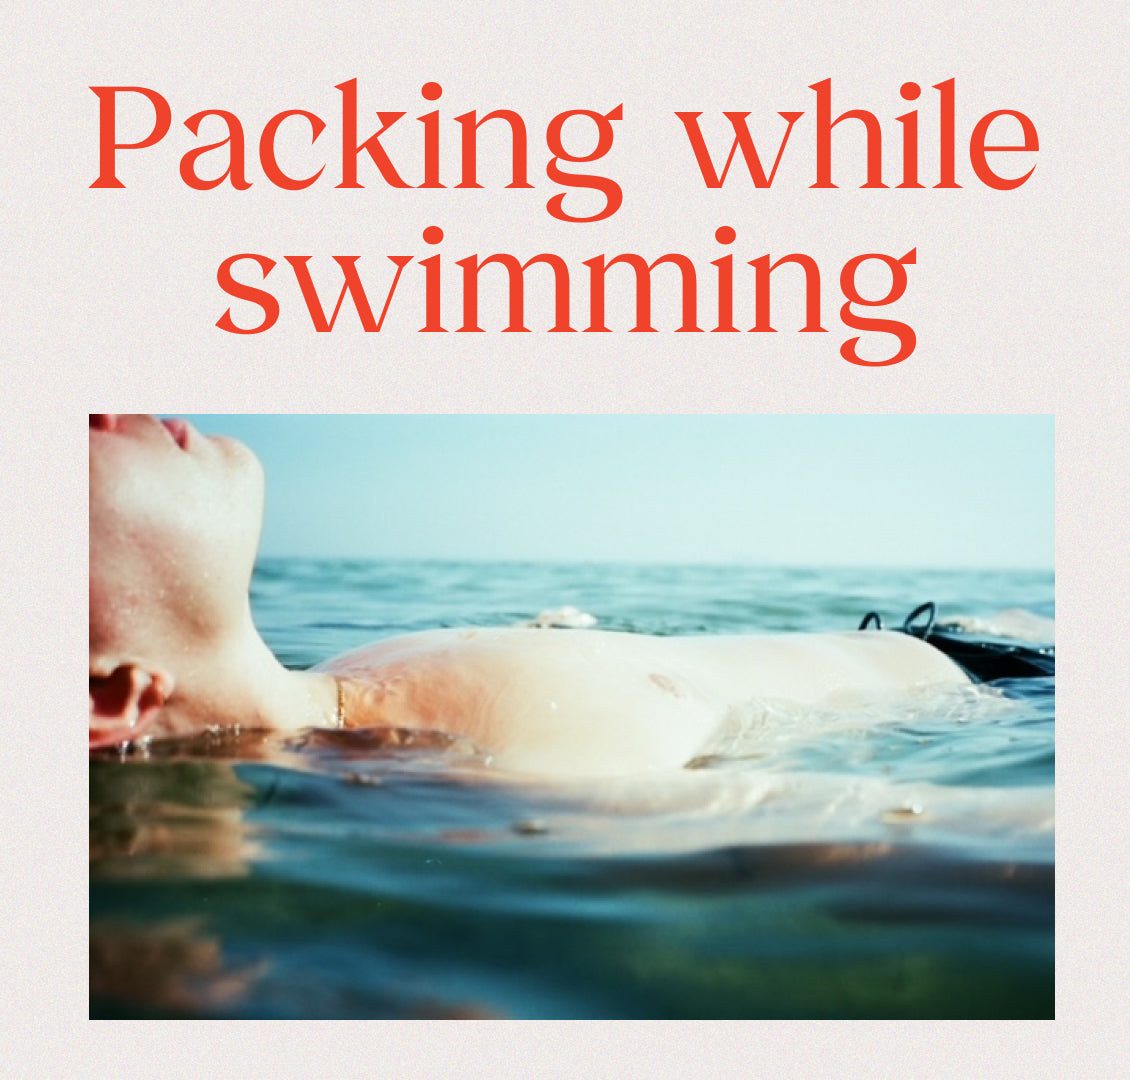 Packing while swimming